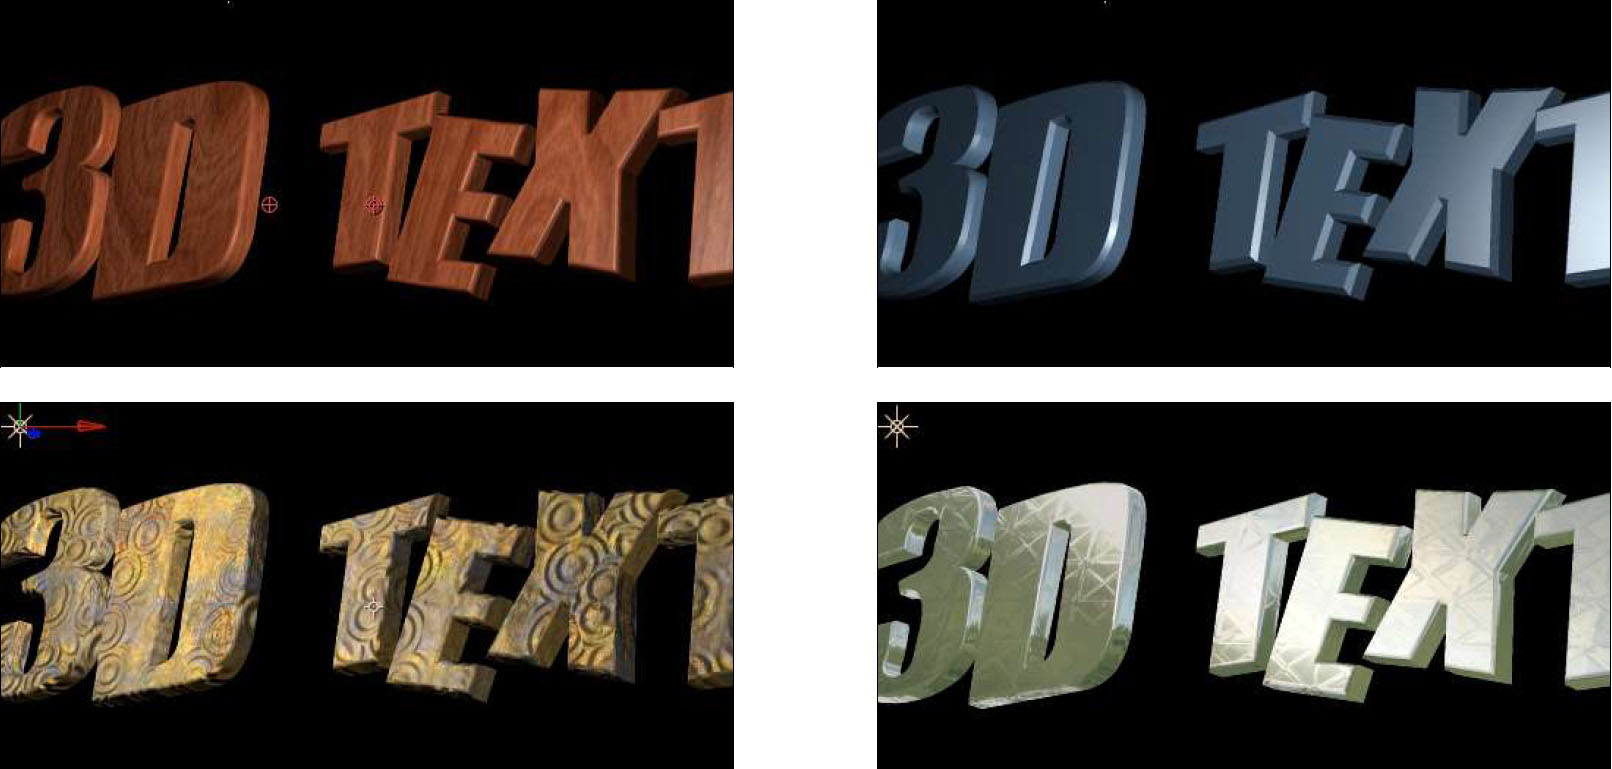 Extruded Text 9